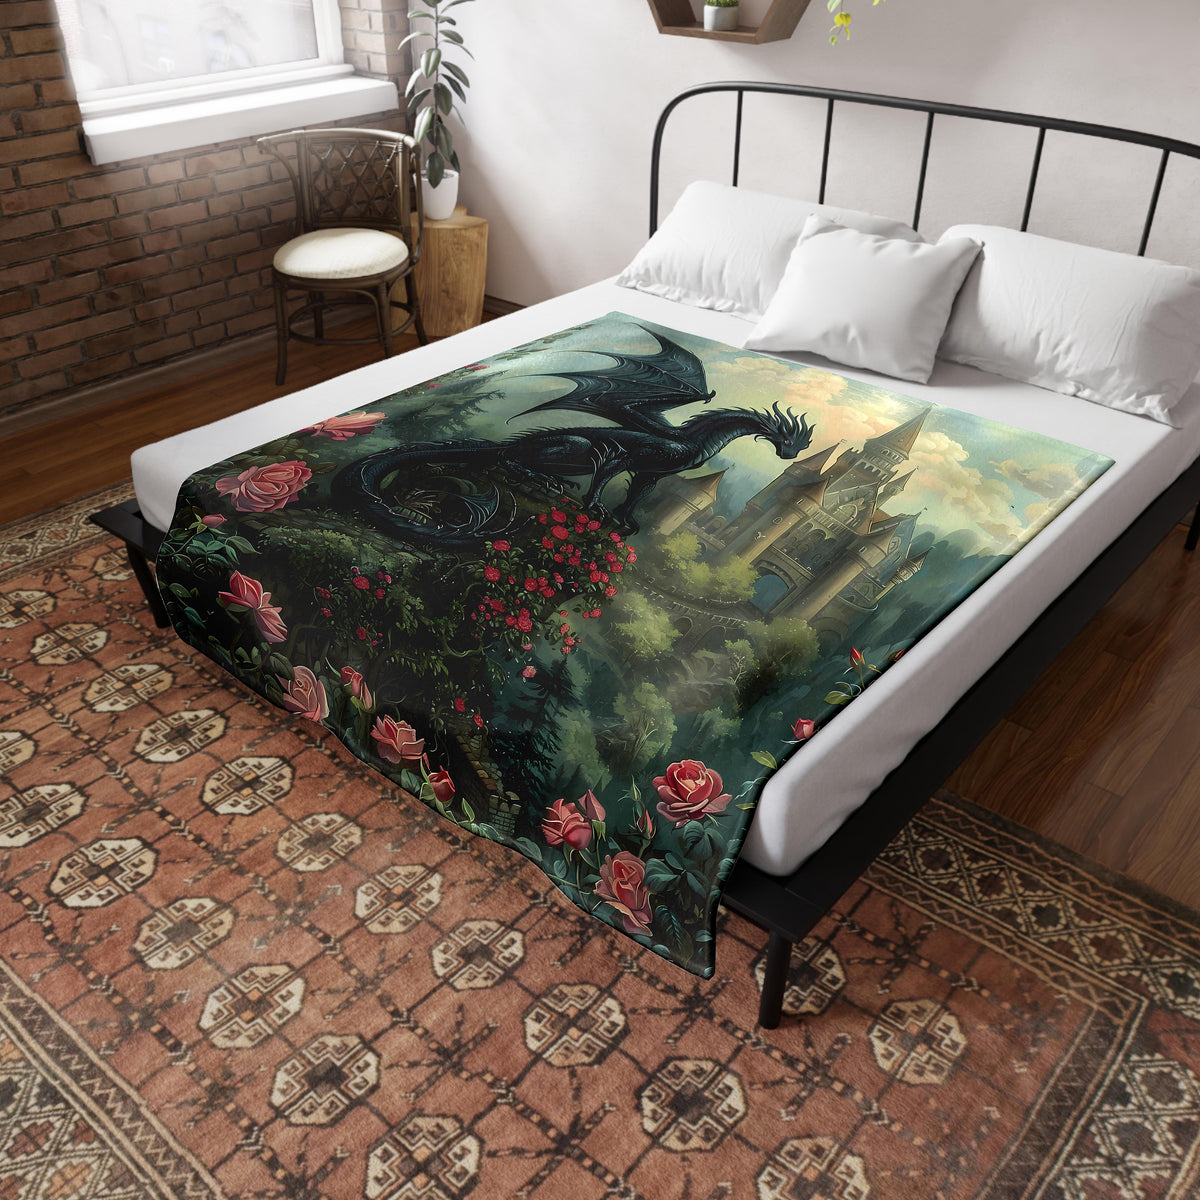 a bed with a picture of a dragon on it